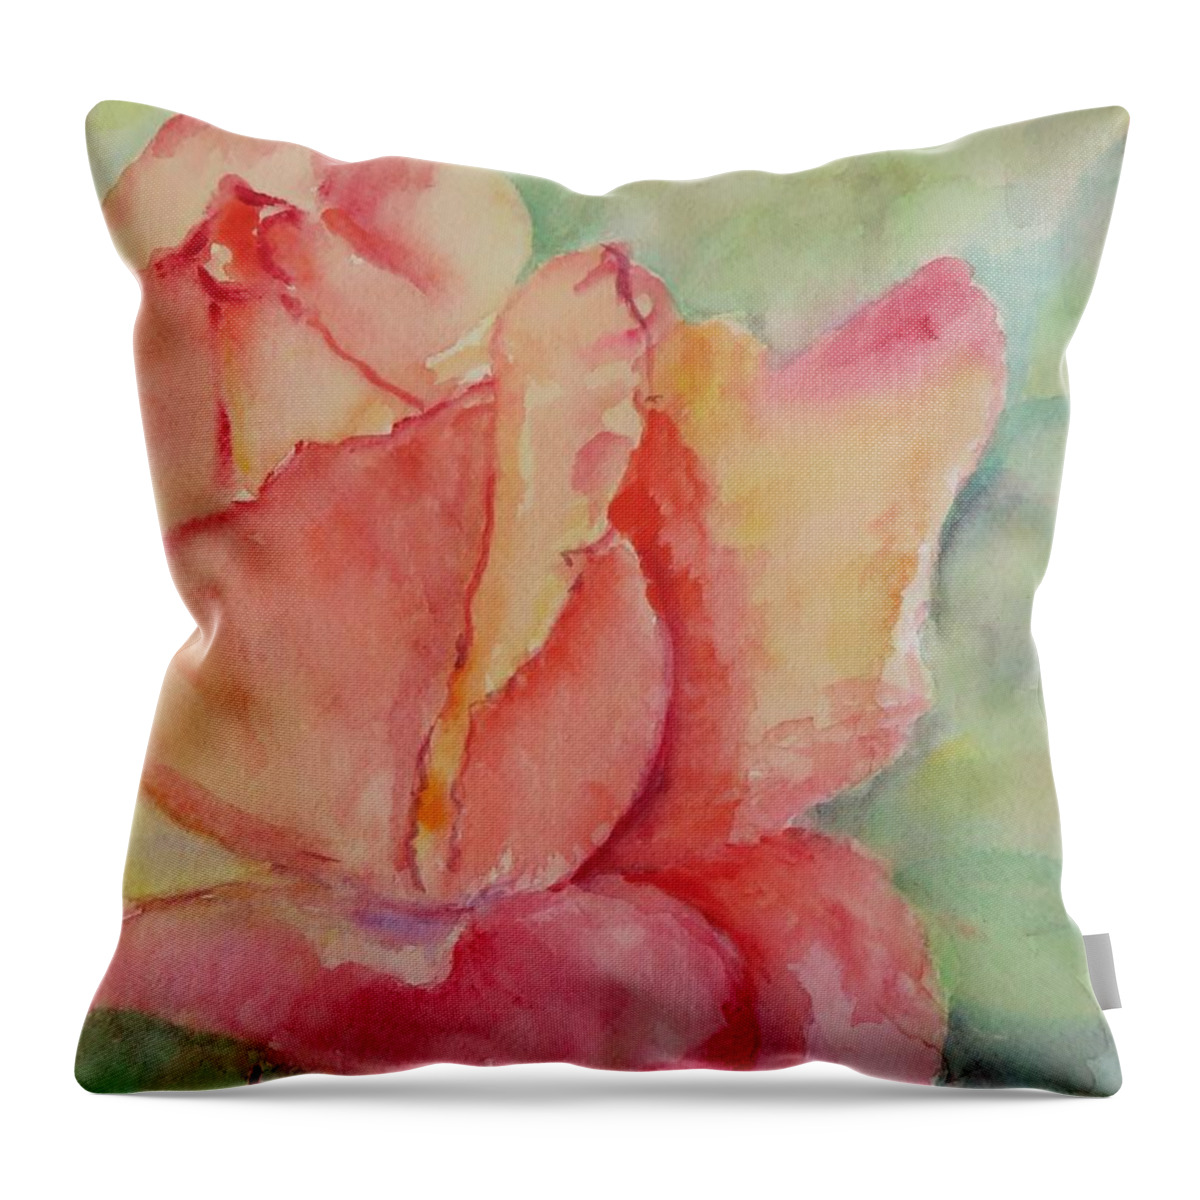 Rose Throw Pillow featuring the painting Blooming Rose by Laurie Morgan